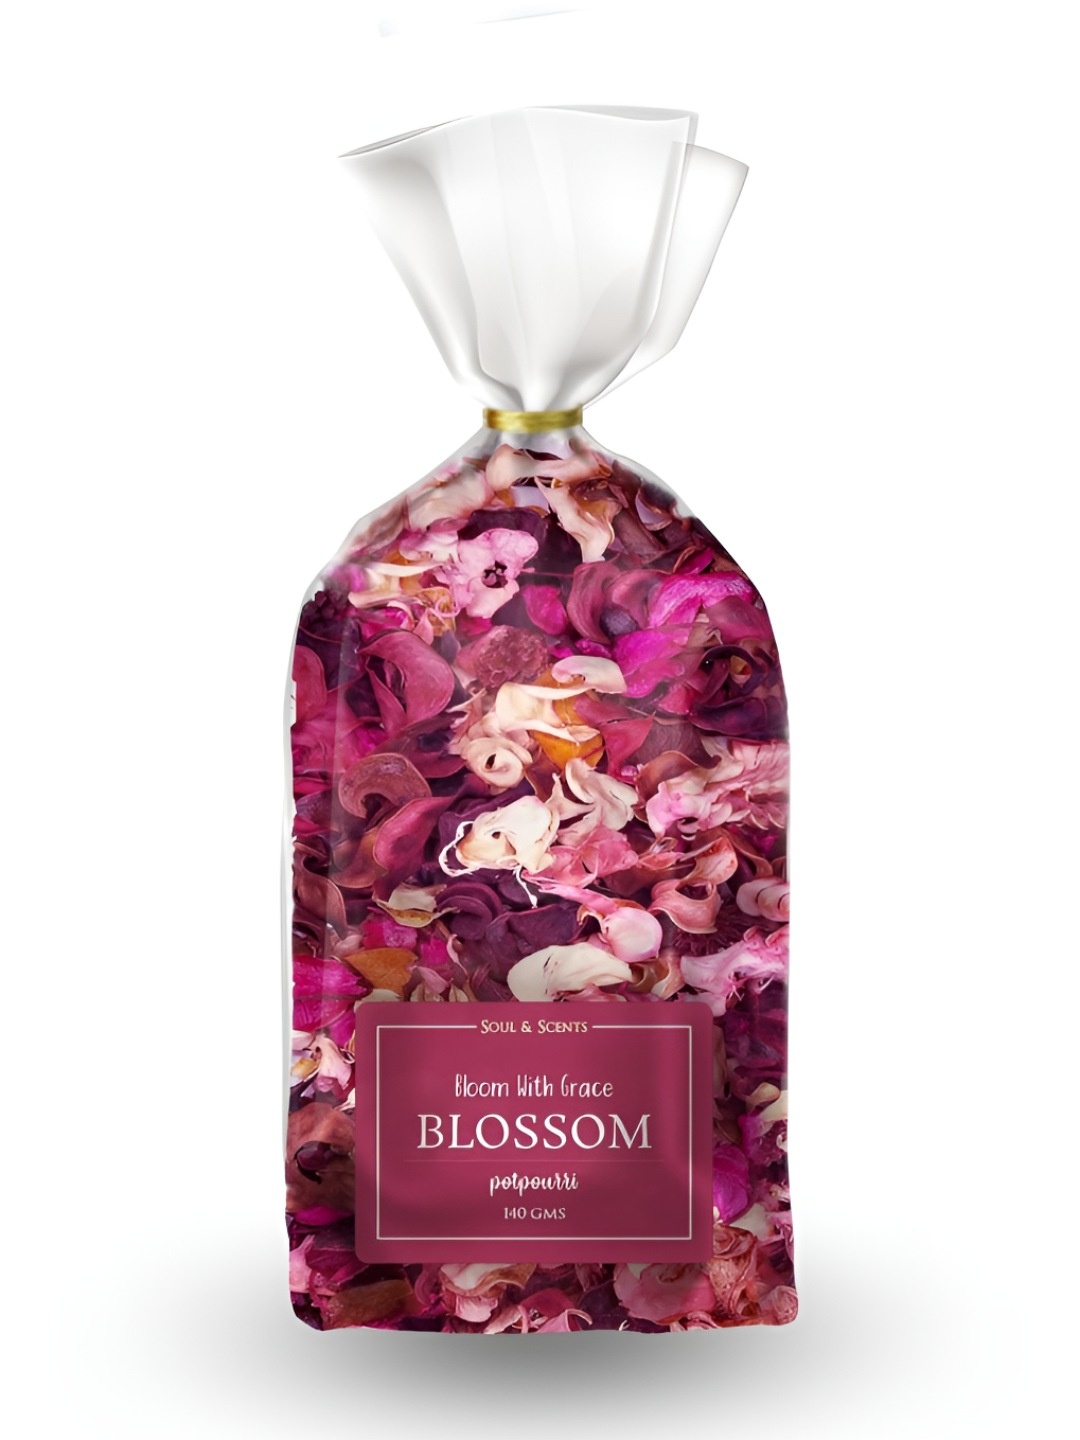 

SOUL & SCENTS Textured Blossom Potpourri 140 g, Pink